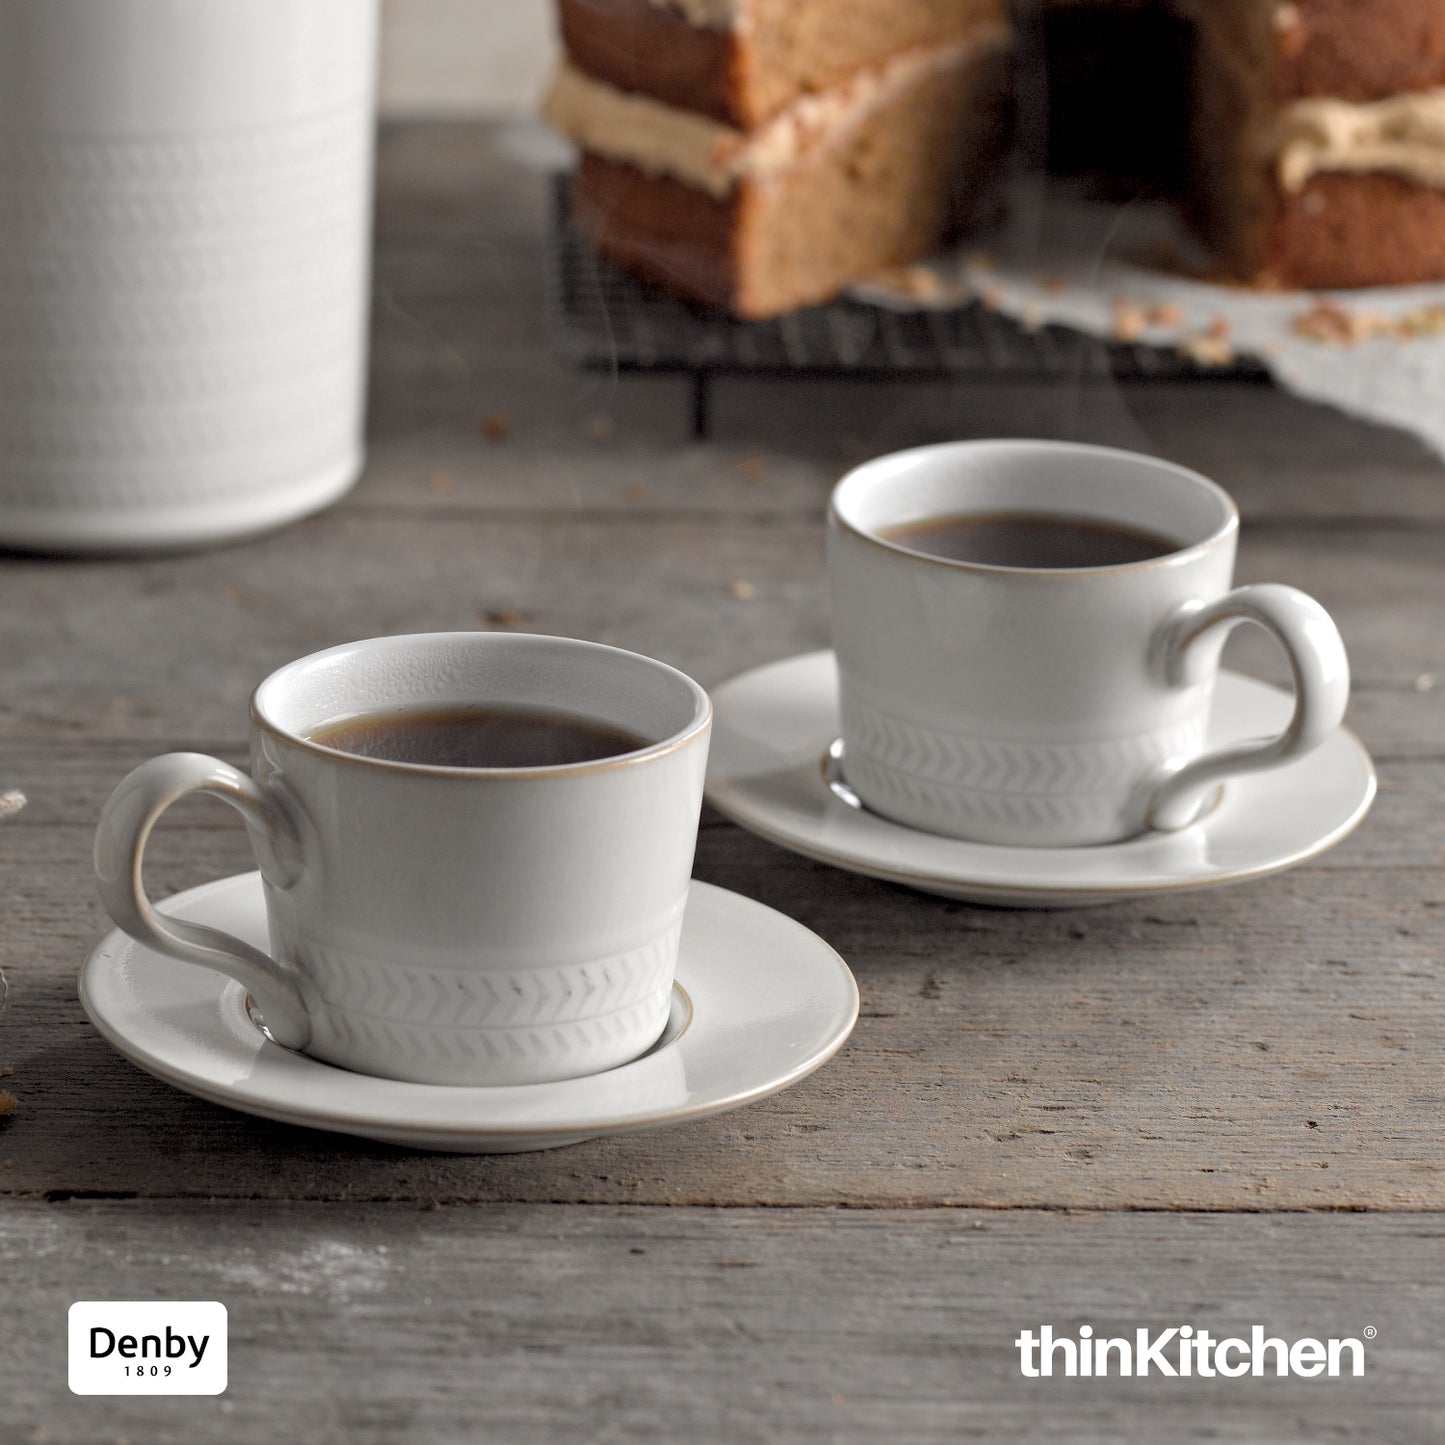 Denby Natural Canvas Tea And Coffee Saucer